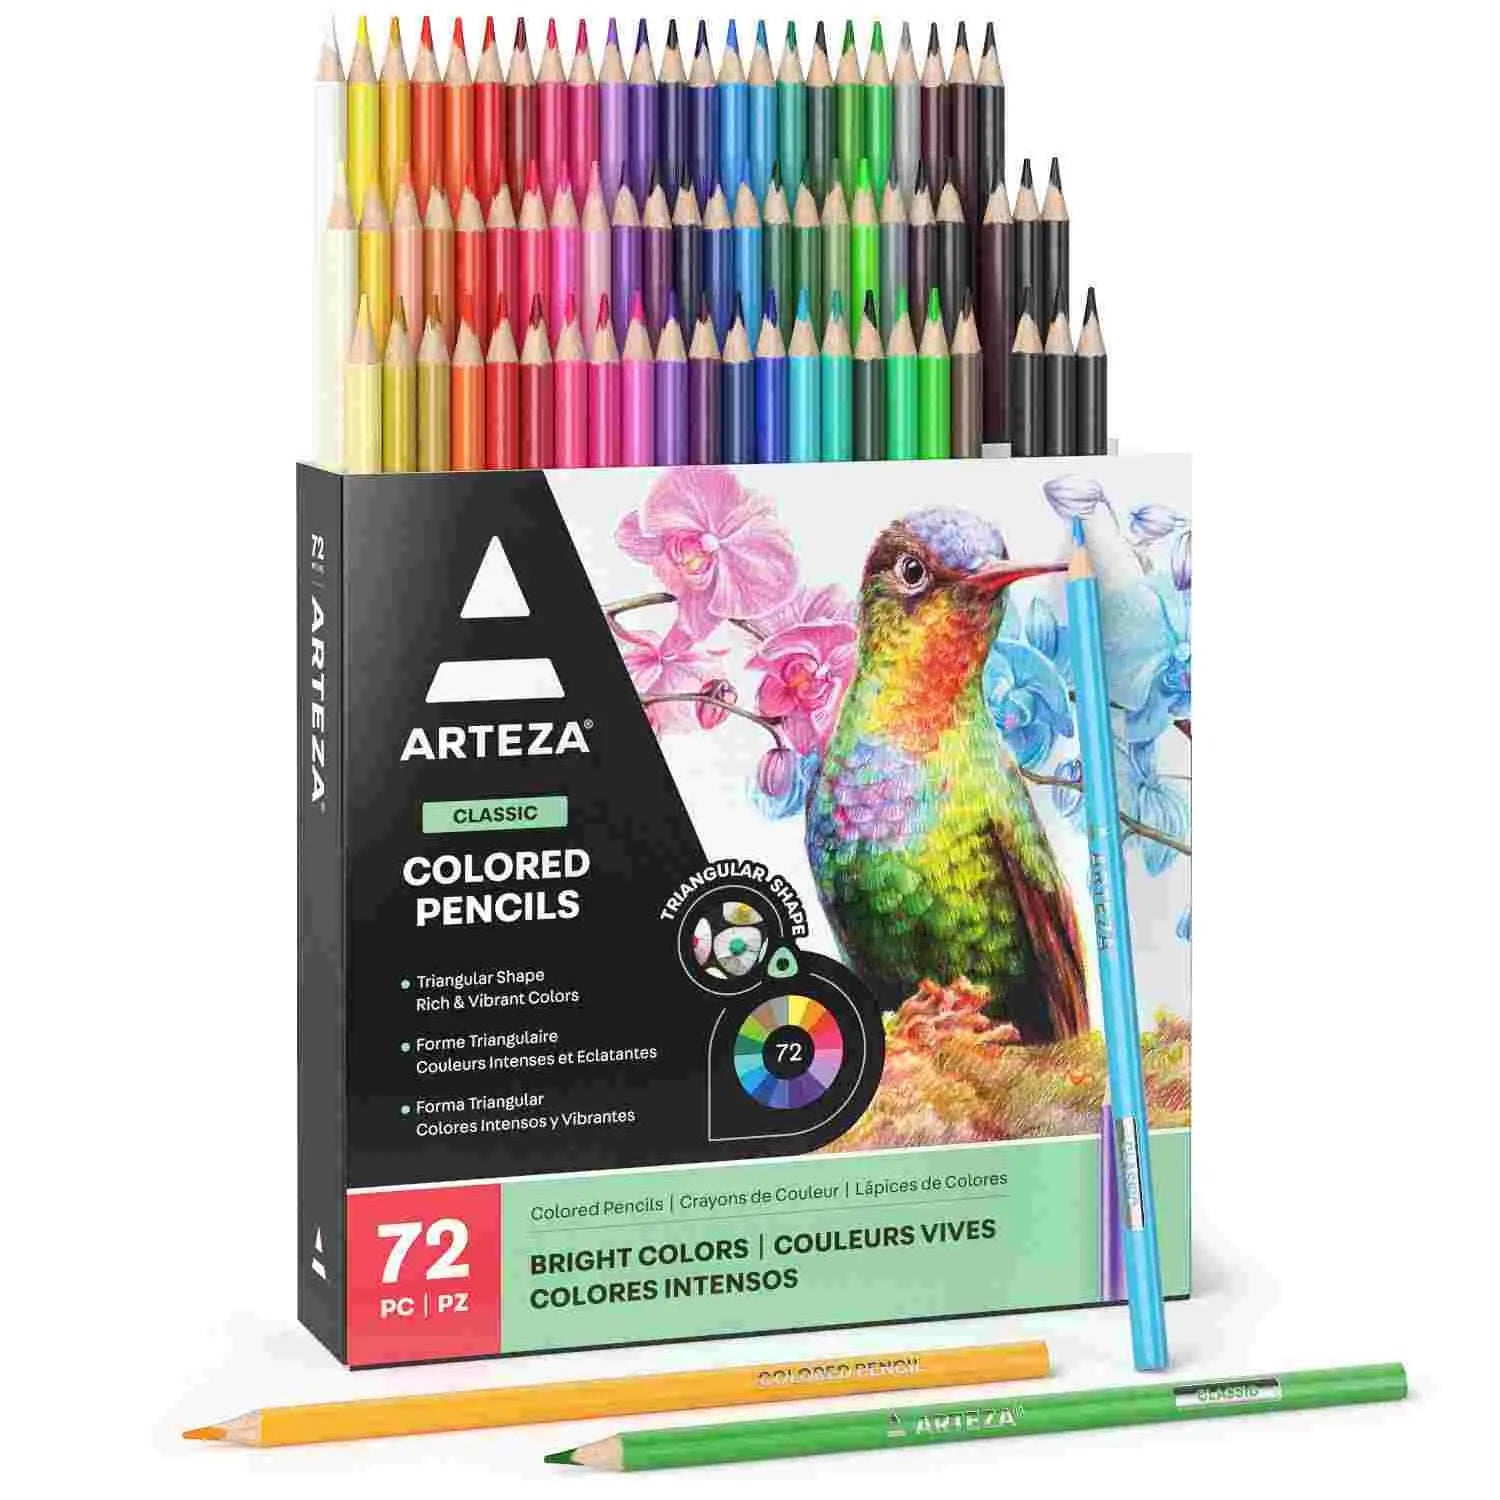 ARTEZA Colored Pencils for Adult Coloring with Case, 72 Assorted Drawing Pencils in Vibrant Colors, Pencil Set for Coloring Books and Journals, Triangular Shape, Professional Art Supplies for Artists Arteza